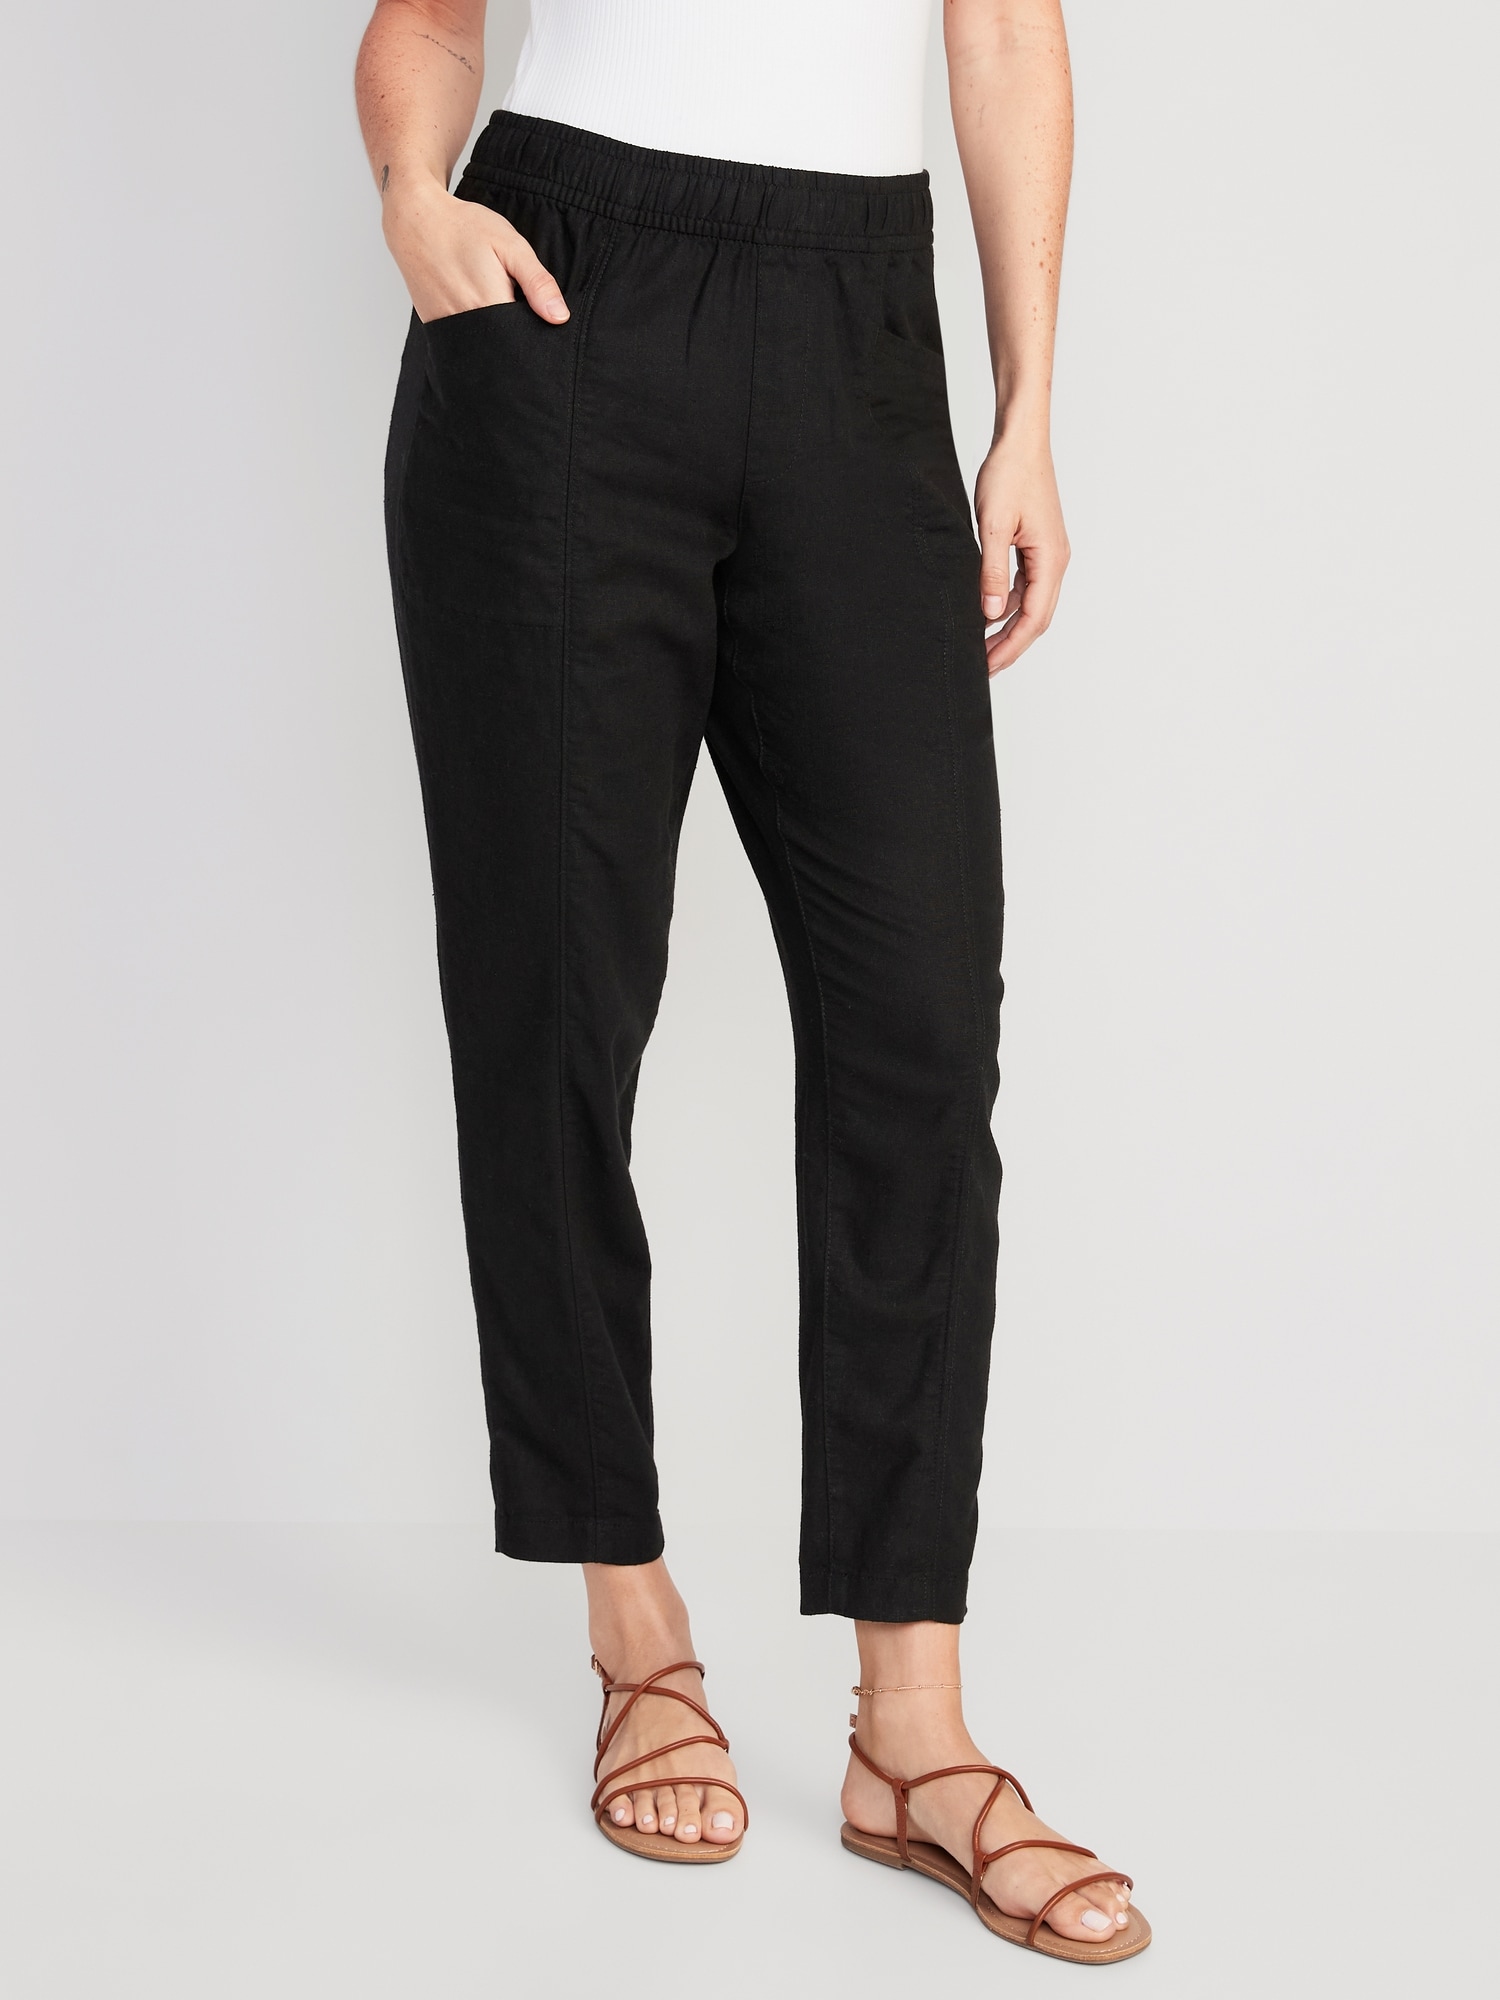 Black Linen Pants/ Preppy Pleated High waisted Tapered